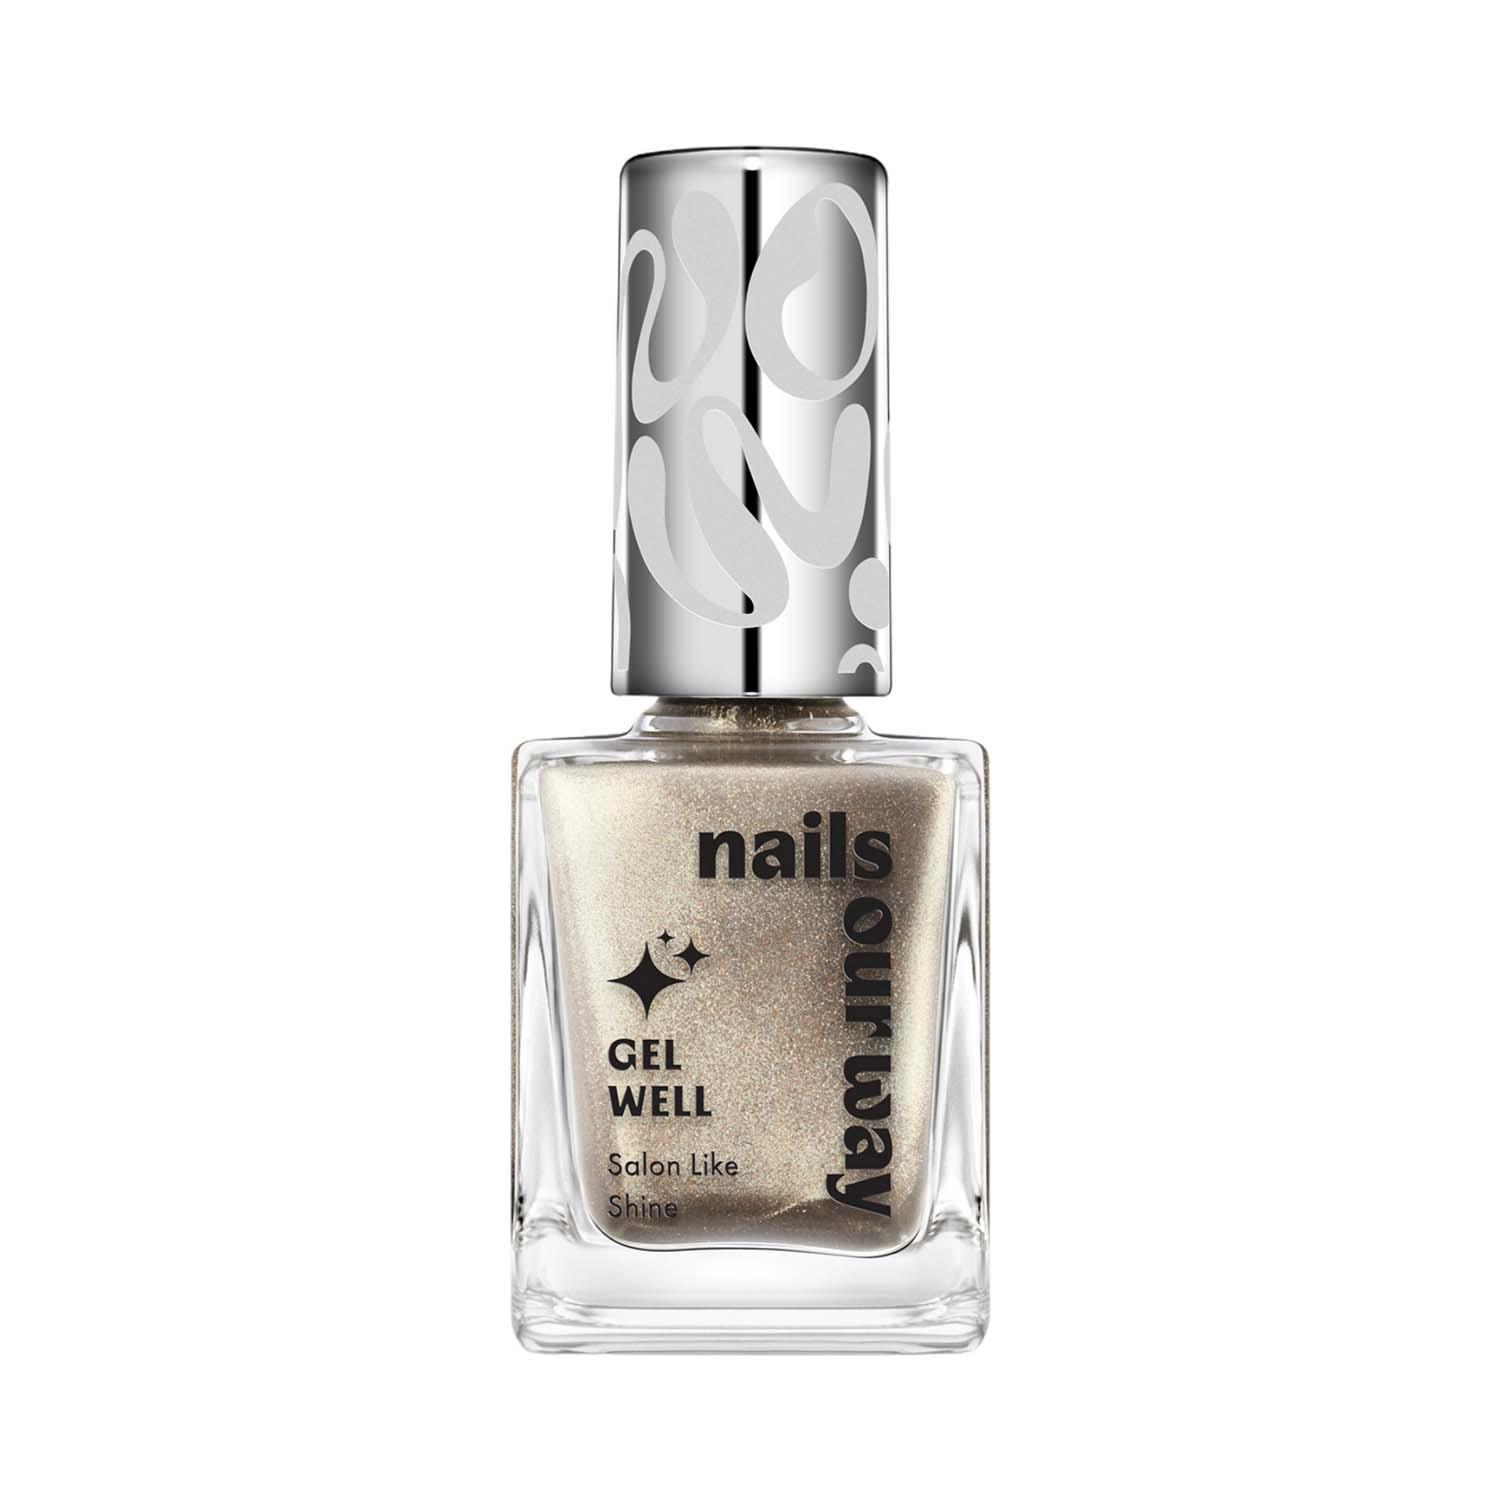 Nails Our Way Gel Well Nail Enamel - 603 Invigorating (10 ml)